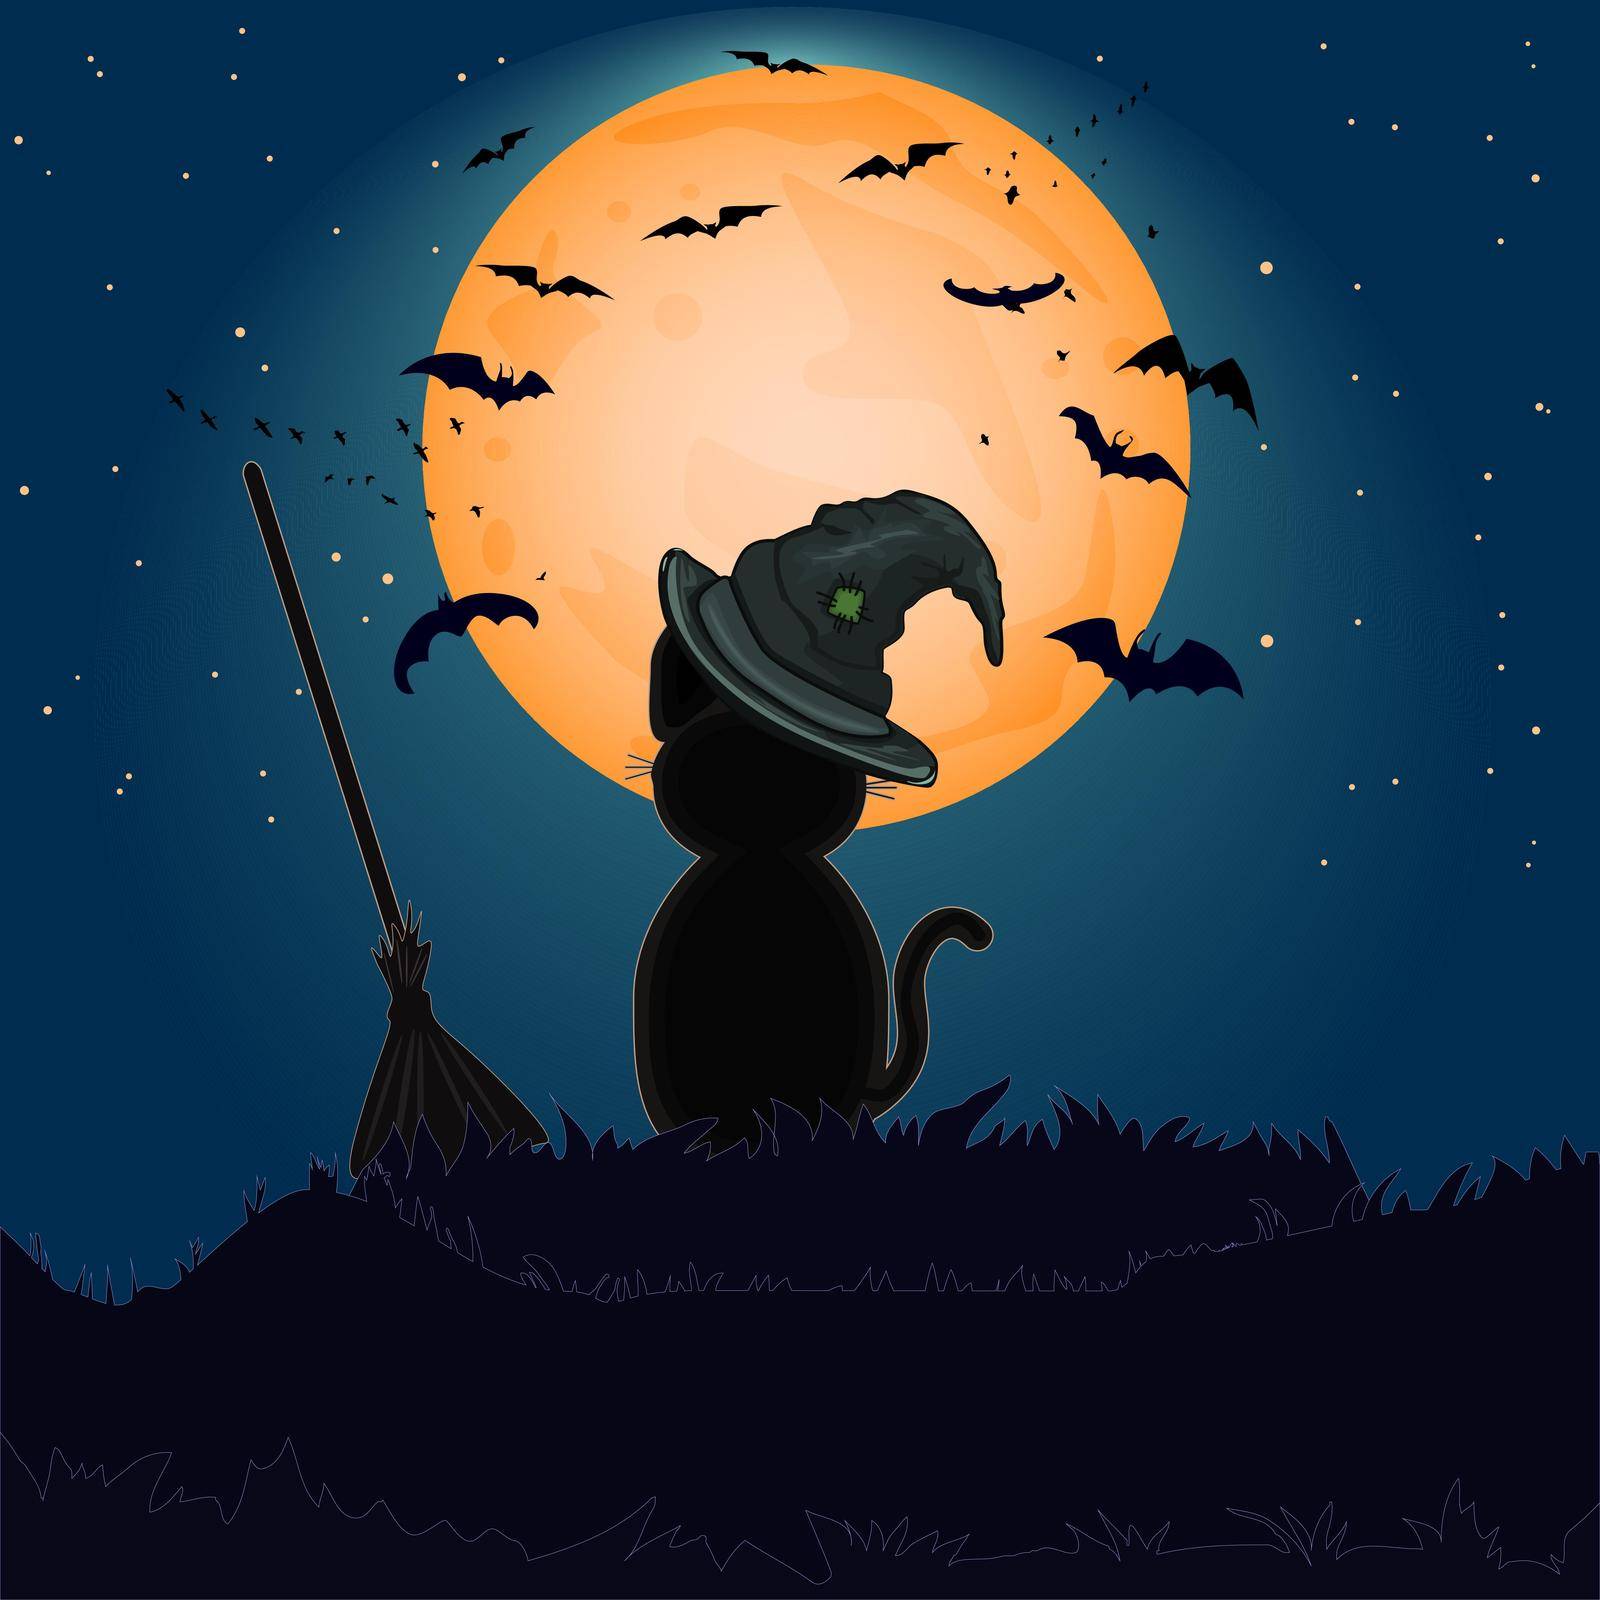 Halloween night background with kitty silhouette and bats on moonlight. Cat sits at night and looks at the bats in the moonshine. Stock vector illustration